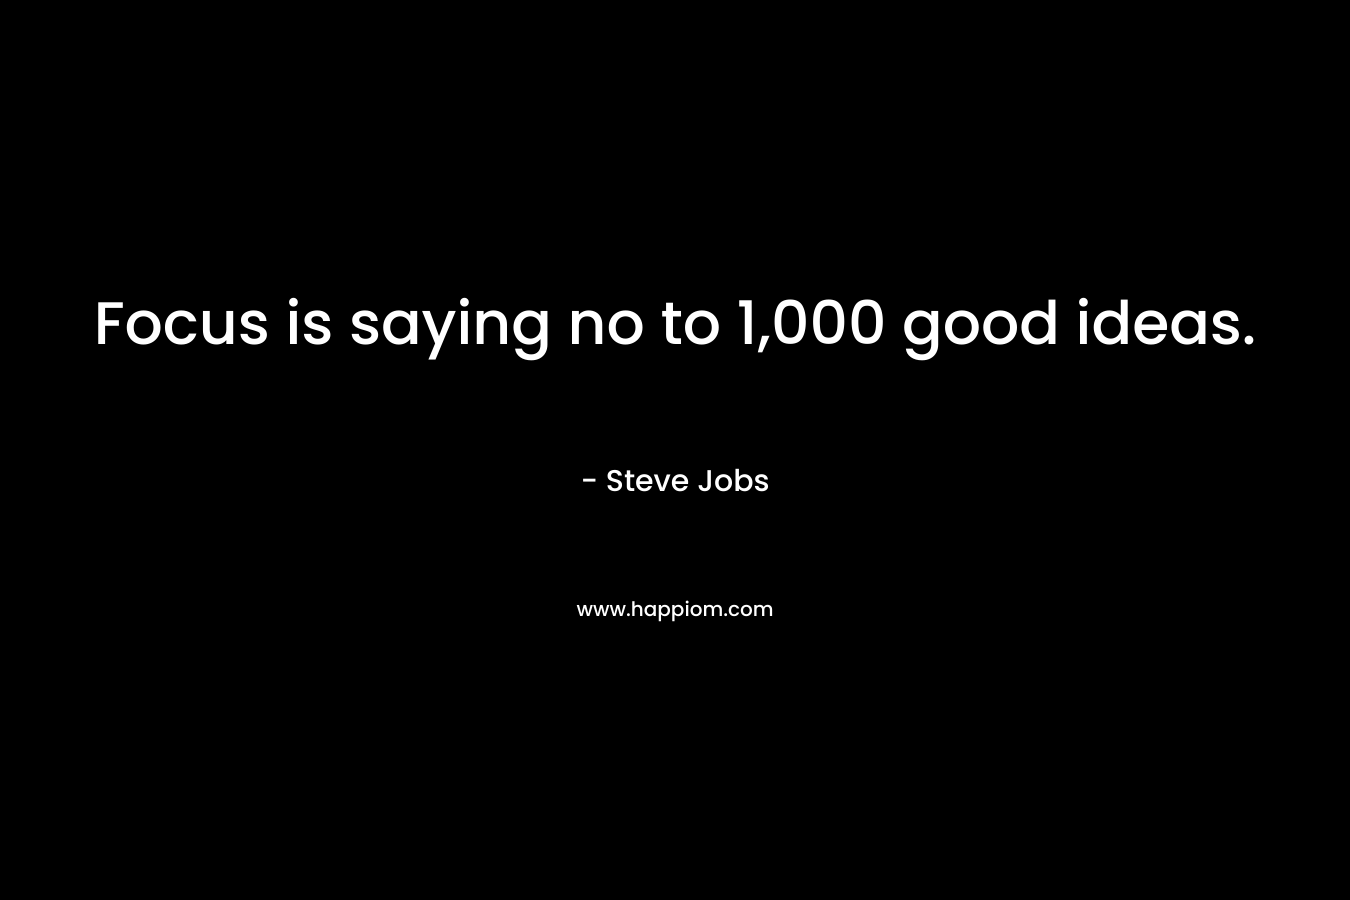 Focus is saying no to 1,000 good ideas. – Steve Jobs